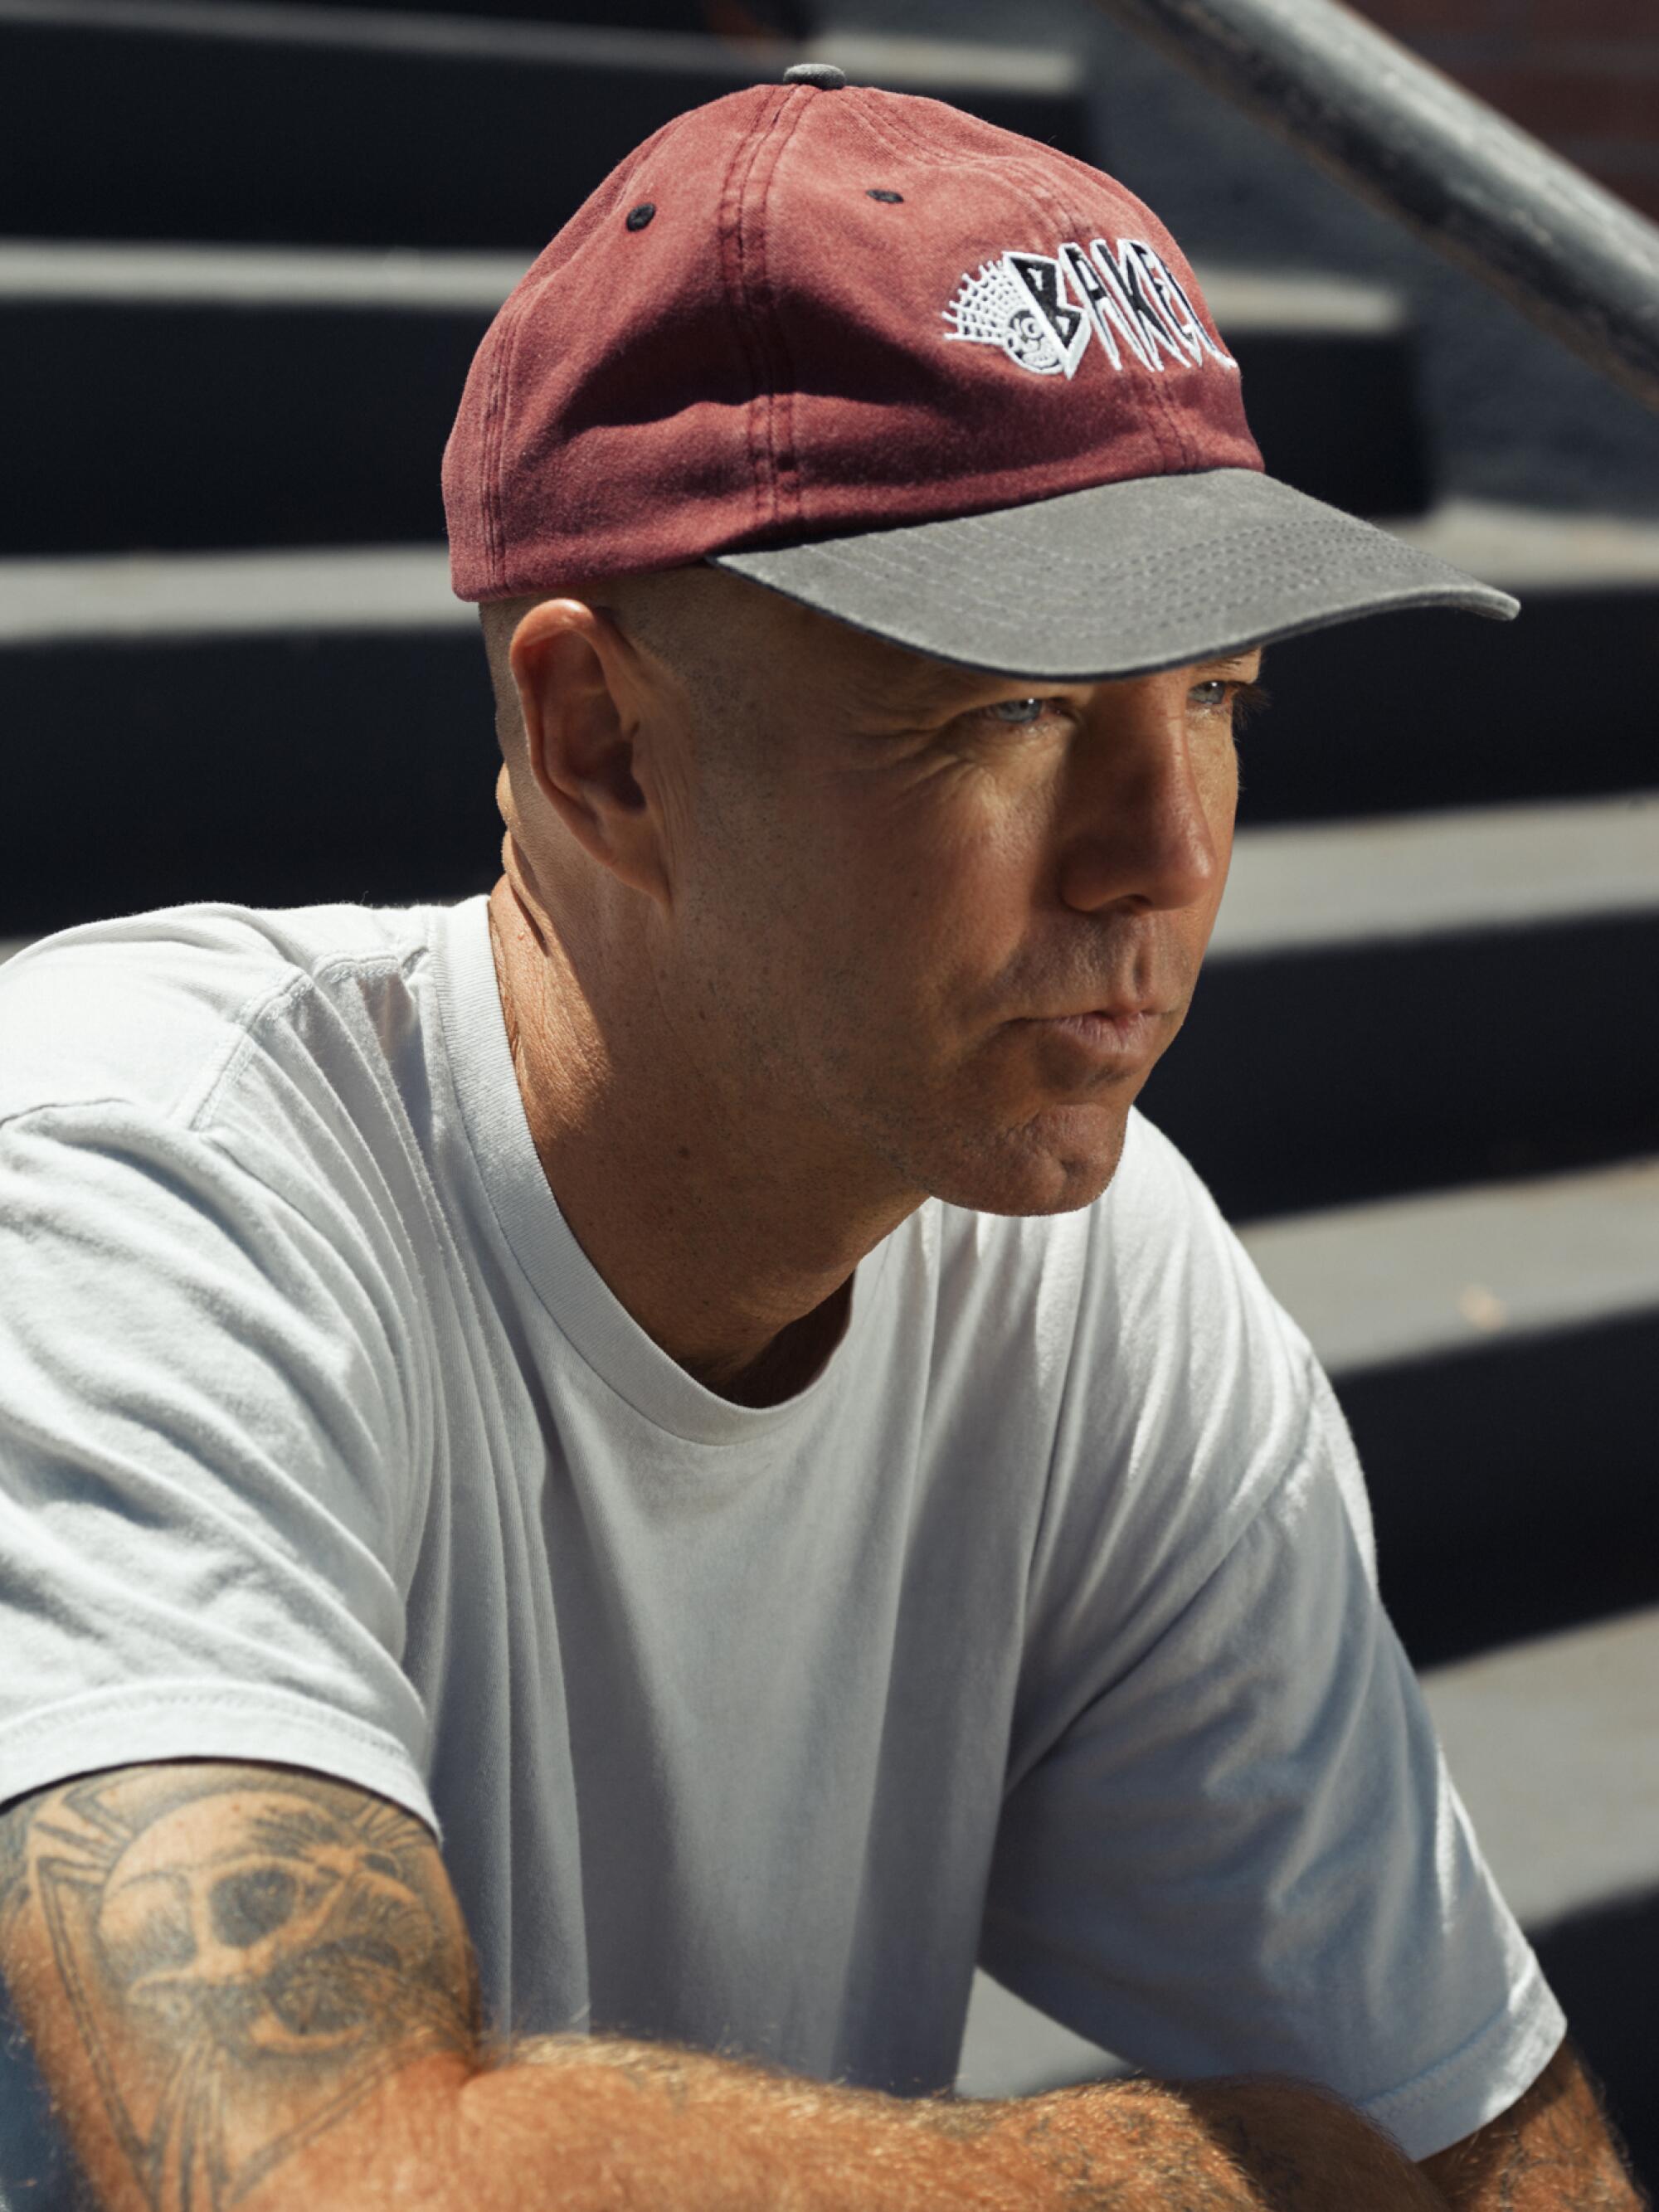 Pro skater Andrew Reynolds sits on the Hollywood High stairs.